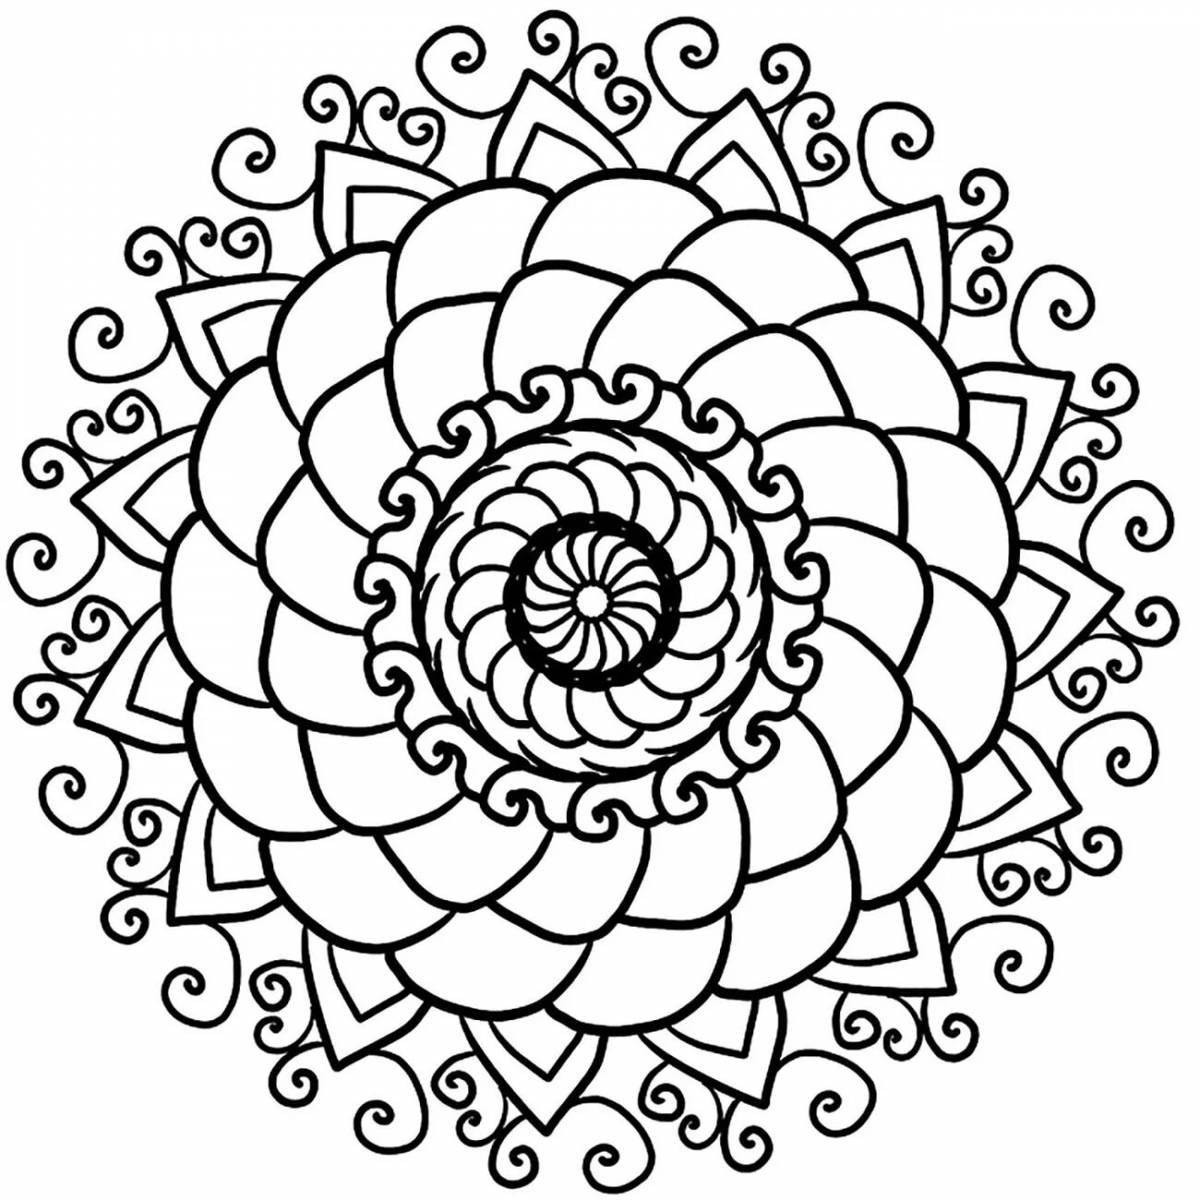 Radiant simple pencil antistress coloring page